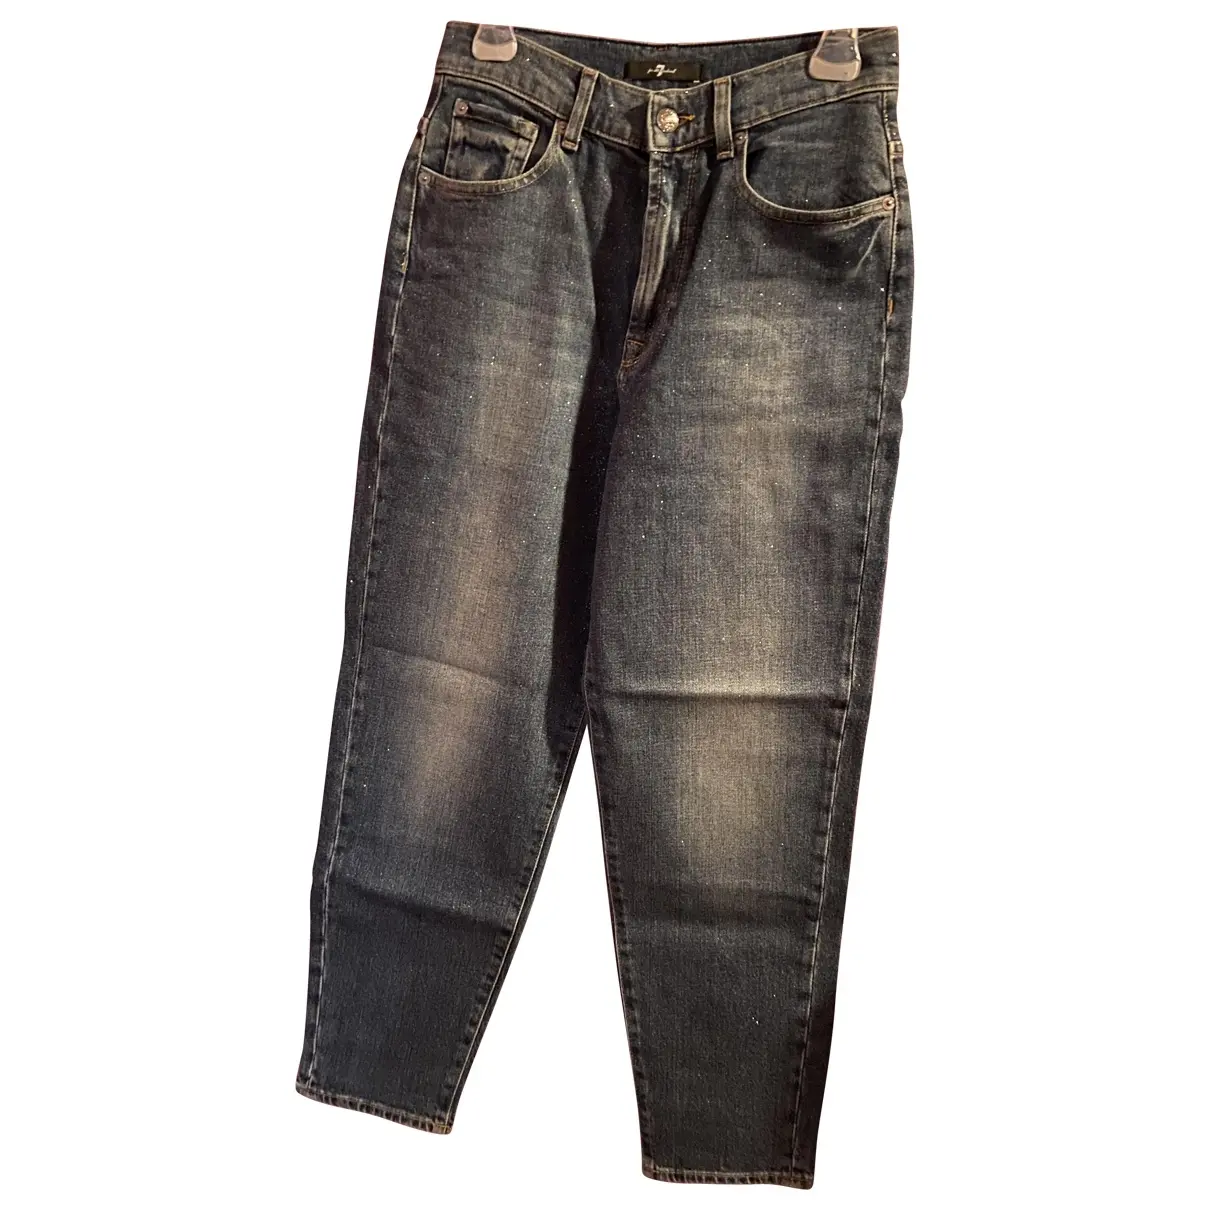 Blue Cotton Jeans 7 For All Mankind